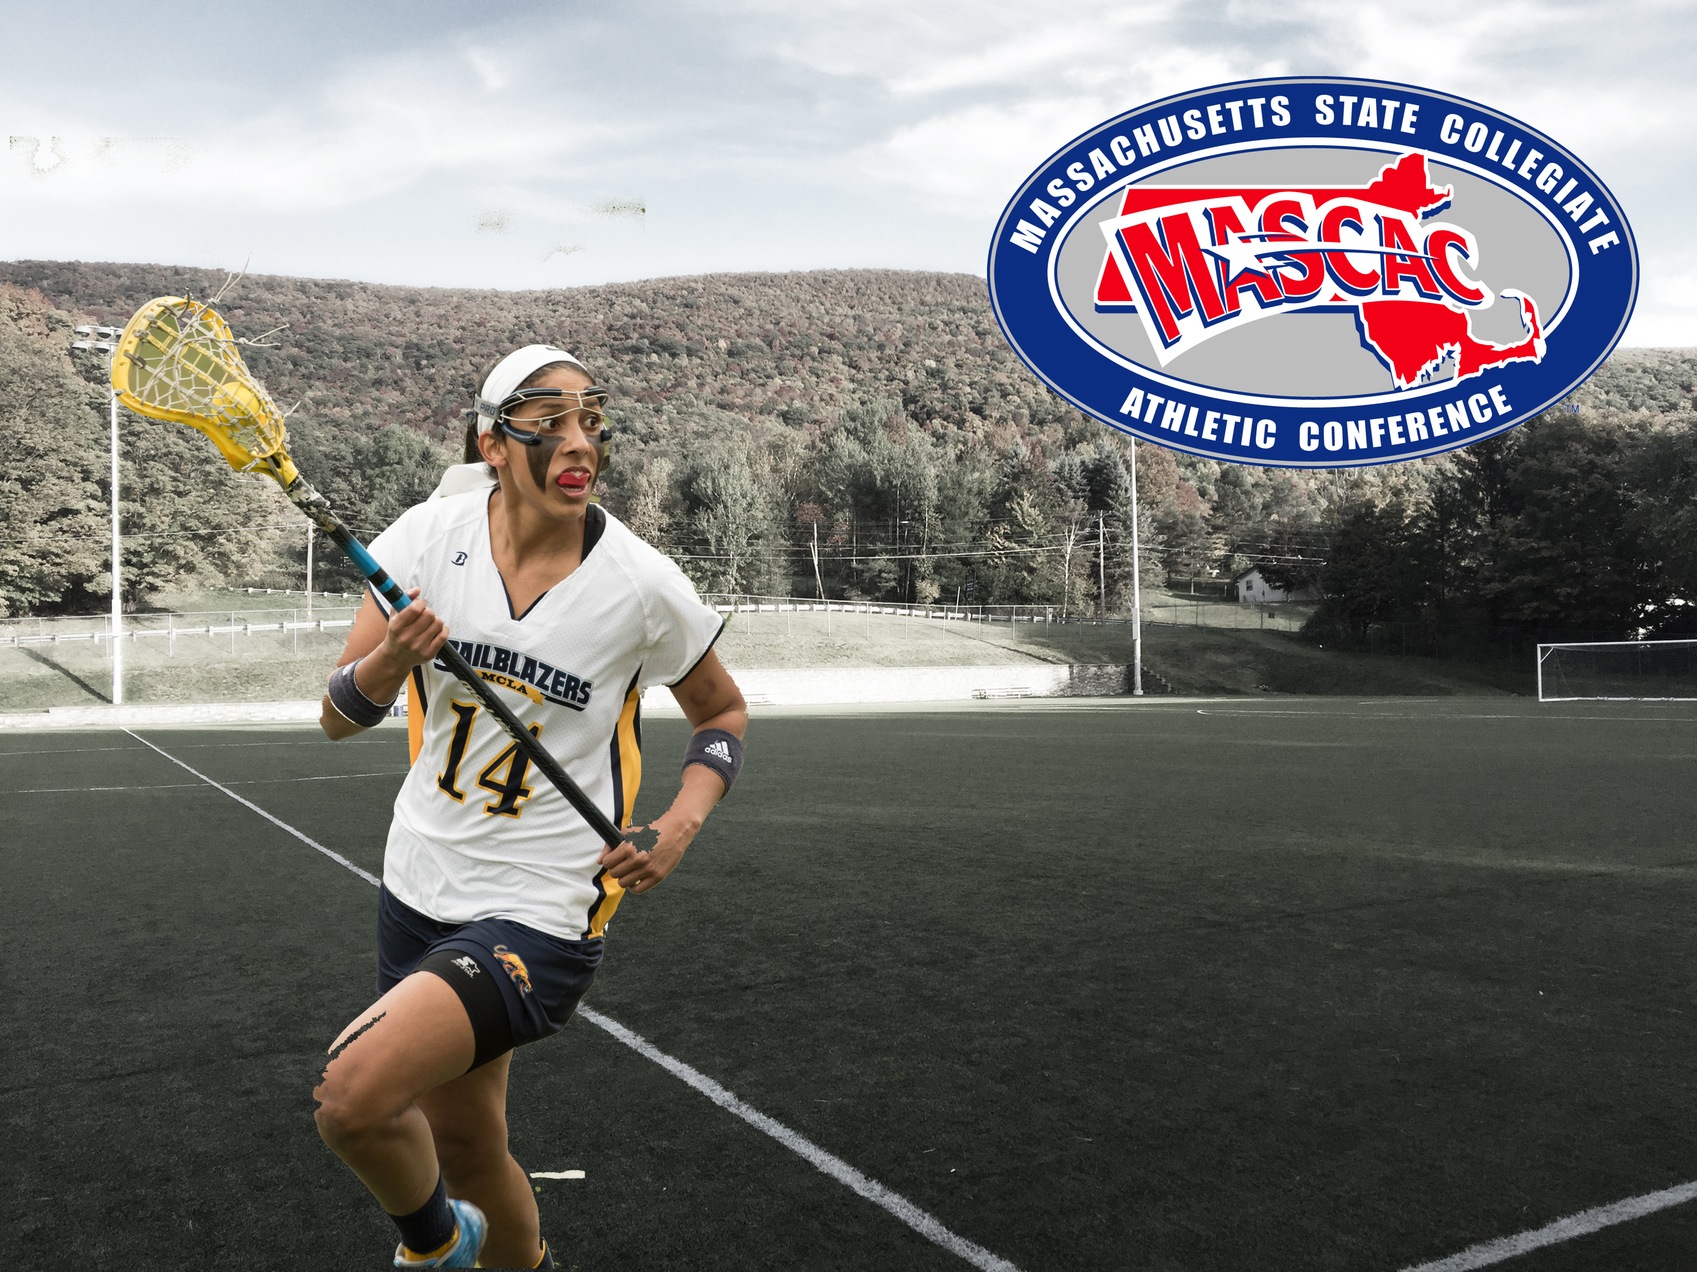 Caney repeats as an All MASCAC selection in Lacrosse